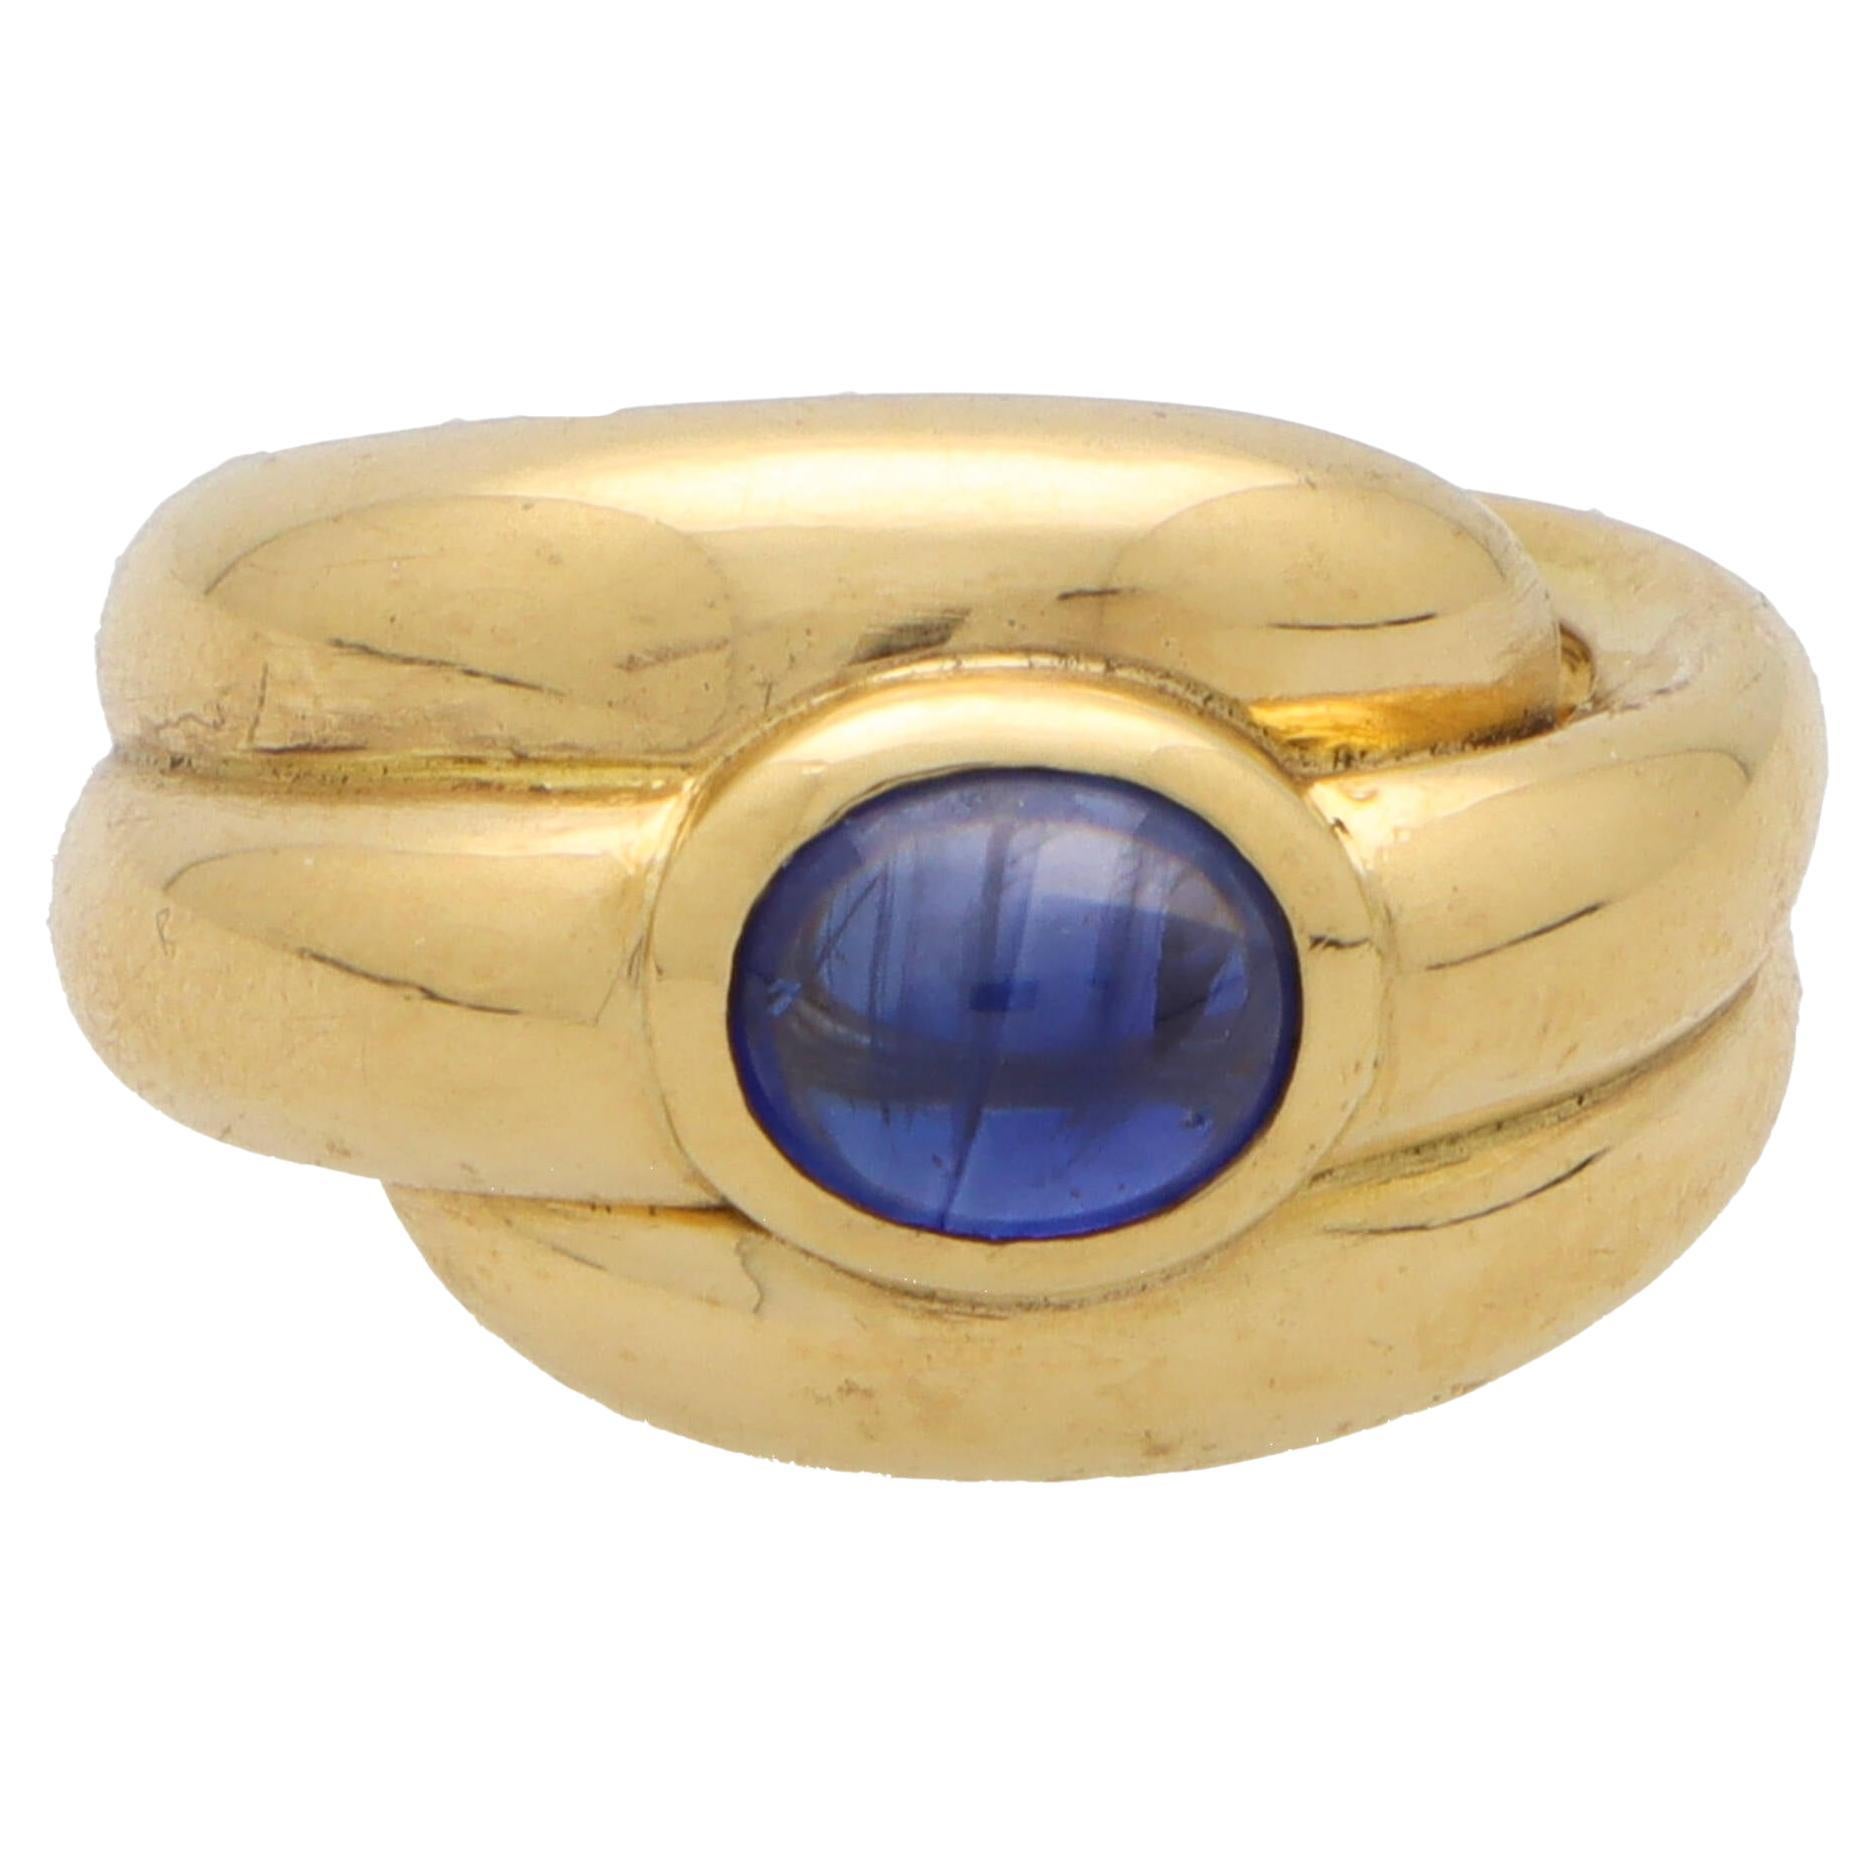 Vintage French Bombé Cabochon Sapphire Ring in 18k Gelbgold im Angebot